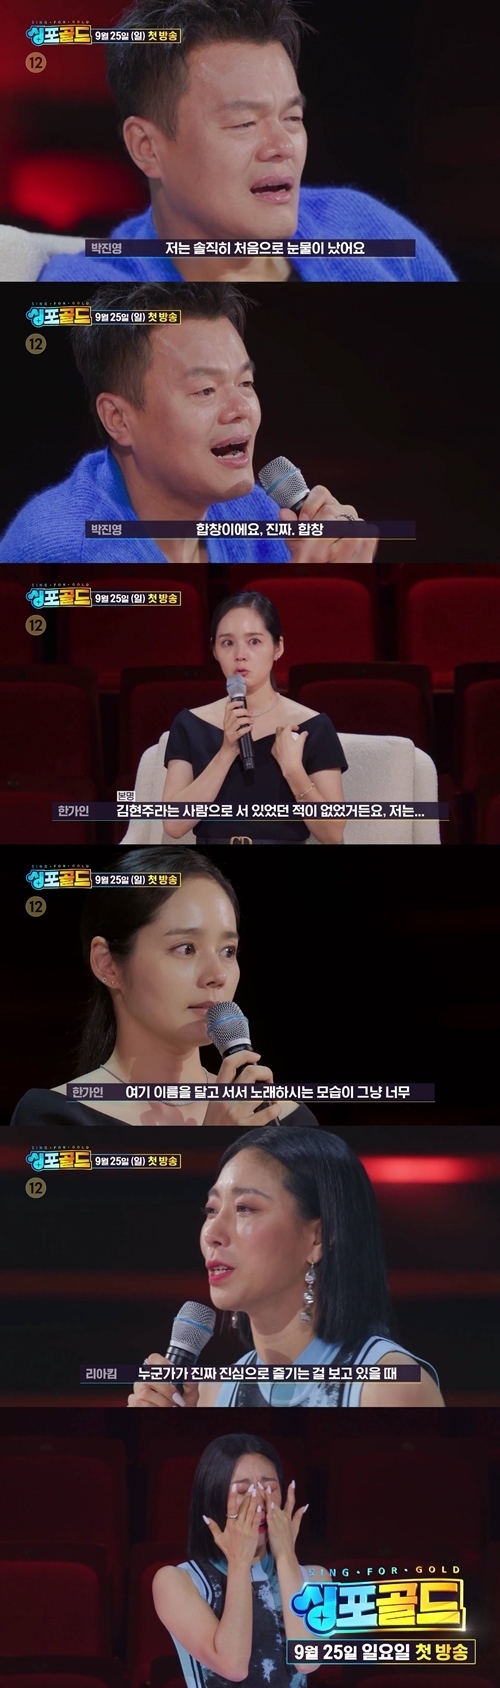 J. Y. Park, Han Ga-in and Li Joaquim all poured tears.SBS synfogold released a teaser video on September 5th with live reviews of J. Y. Park, Han Ga-in and Li Joaquim.In the public video, some of the stage of the participating teams are also slightly revealed, and interest and curiosity are getting more and more popular.Among them, J. Y. Park was seen rusting down with a moist eye on the stage of a participating team.J. Y. Park, who I was tearful for the first time in the synfogold qualifier, could not speak for a while after admiration.J. Y. Park, still red-eyed, said, Its a chorus, a real chorus. I wanted to hear this, so I did a synfogold.Han Ga-in, too, had been standing in tears throughout the stage of a female choir, silently, as Kim Hyun-joo, who had given birth to a child and lived only as a mother (resting an actor) for a while.It was so touching to see you singing with your name on your chest, she said, barely holding her emotions.Han Ga-ins sincere tears, which have recently resumed their activities, have attracted the sympathy of the viewers.Li Joaquim poured tears into the audition program for very unusual reasons.Li Joaquim, who cheered and applauded the stage of a participating team chorusing with explosive energy, was filled with emotions that were difficult to control at the moment.Why do you have tears when you listen to such an exciting song? said Li Joaquim, who was surprised, I was tearful when I was watching someone really enjoy it.